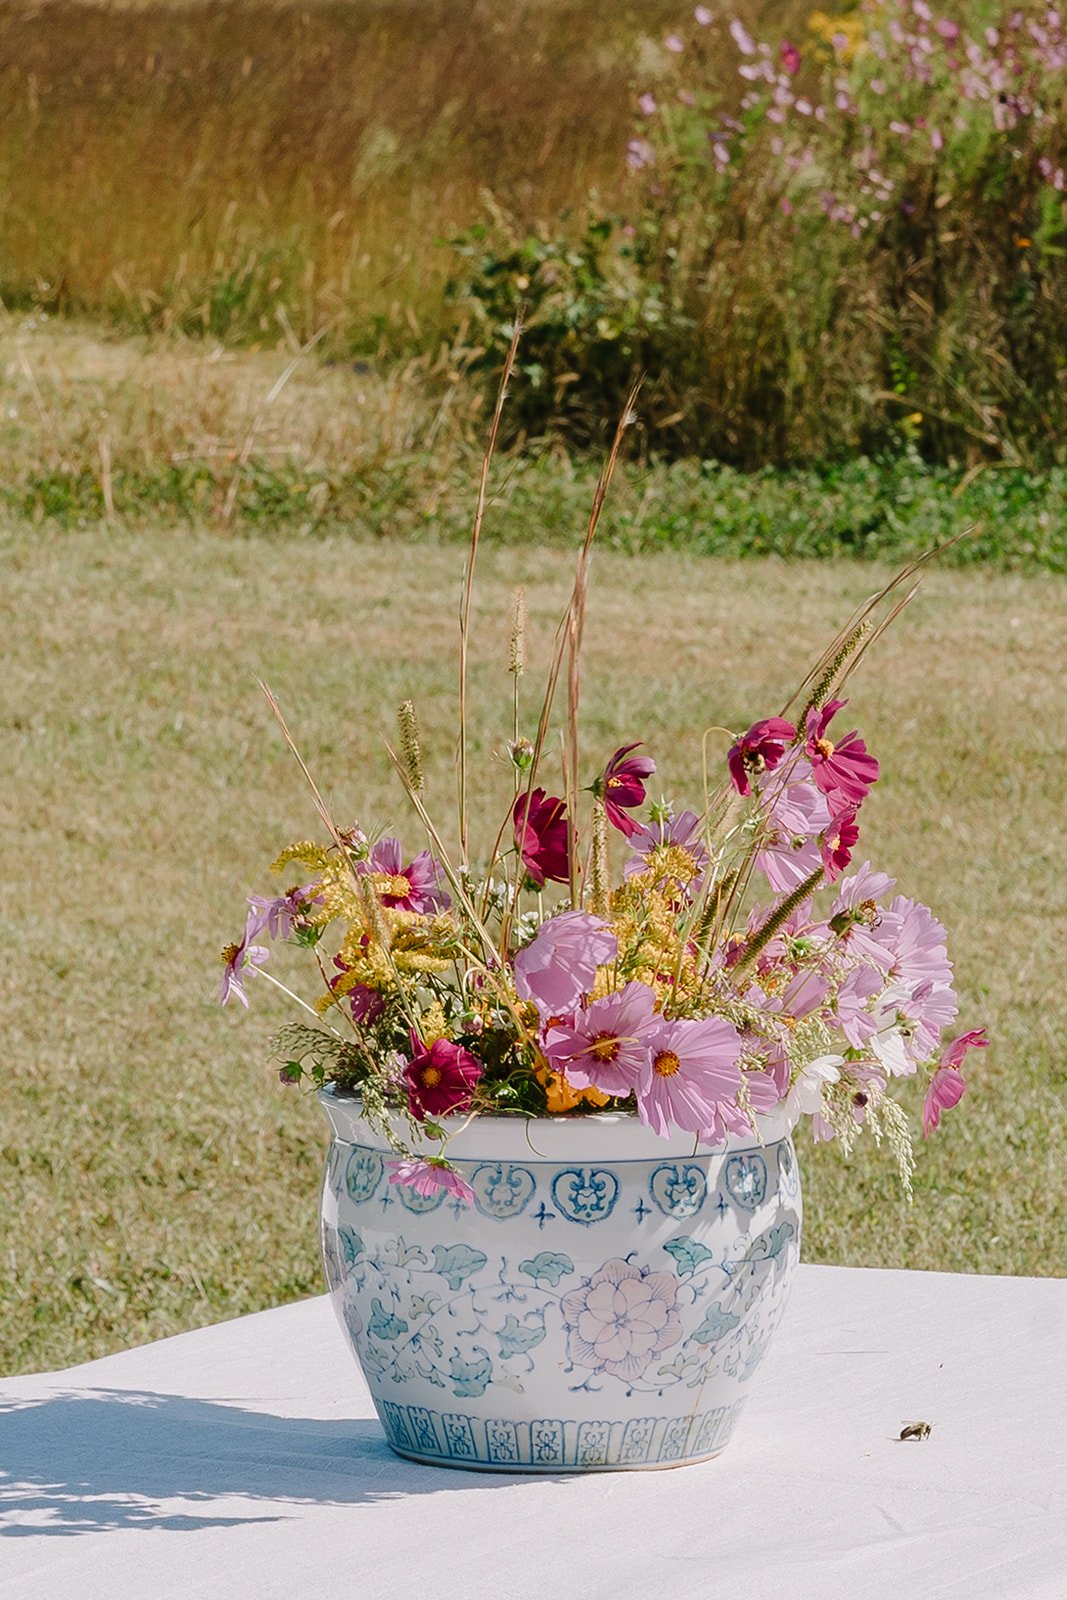 An Intimate Wedding in Tn at Mable & Jack Farmstead - Welcome Picnic - Destination Wedding Photographer (6).jpg